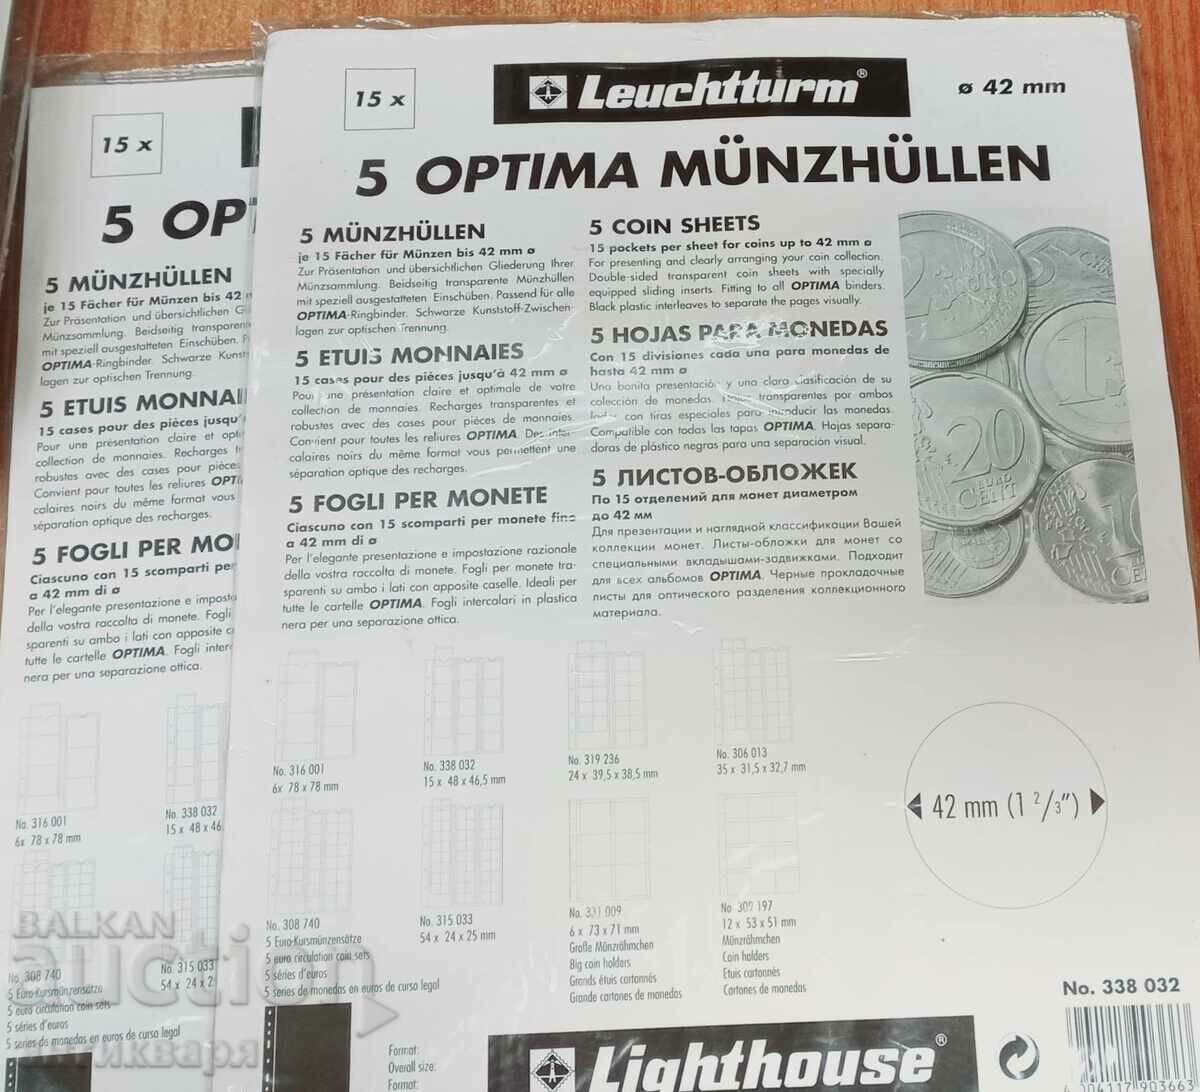 OPTIMA sheets for coins up to 42mm. 15 pcs per sheet